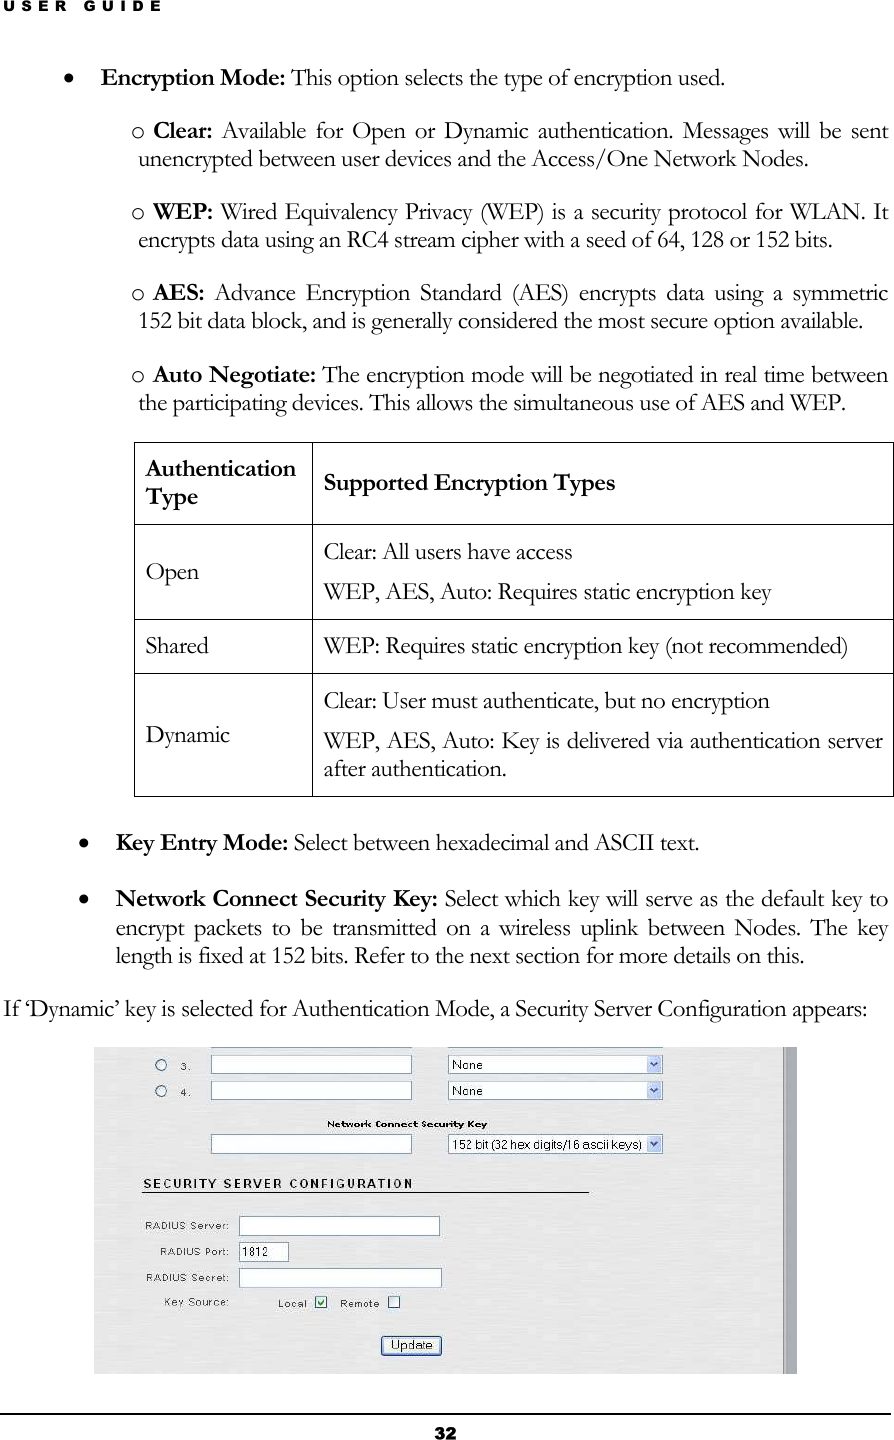 USER GUIDE • Encryption Mode: This option selects the type of encryption used. o Clear: Available for Open or Dynamic authentication. Messages will be sent unencrypted between user devices and the Access/One Network Nodes. o WEP: Wired Equivalency Privacy (WEP) is a security protocol for WLAN. It encrypts data using an RC4 stream cipher with a seed of 64, 128 or 152 bits.  o AES: Advance Encryption Standard (AES) encrypts data using a symmetric 152 bit data block, and is generally considered the most secure option available. o Auto Negotiate: The encryption mode will be negotiated in real time between the participating devices. This allows the simultaneous use of AES and WEP. Authentication Type  Supported Encryption Types Open  Clear: All users have access WEP, AES, Auto: Requires static encryption key Shared  WEP: Requires static encryption key (not recommended) Dynamic Clear: User must authenticate, but no encryption WEP, AES, Auto: Key is delivered via authentication server after authentication.  • Key Entry Mode: Select between hexadecimal and ASCII text. • Network Connect Security Key: Select which key will serve as the default key to encrypt packets to be transmitted on a wireless uplink between Nodes. The key length is fixed at 152 bits. Refer to the next section for more details on this. If ‘Dynamic’ key is selected for Authentication Mode, a Security Server Configuration appears:  32 